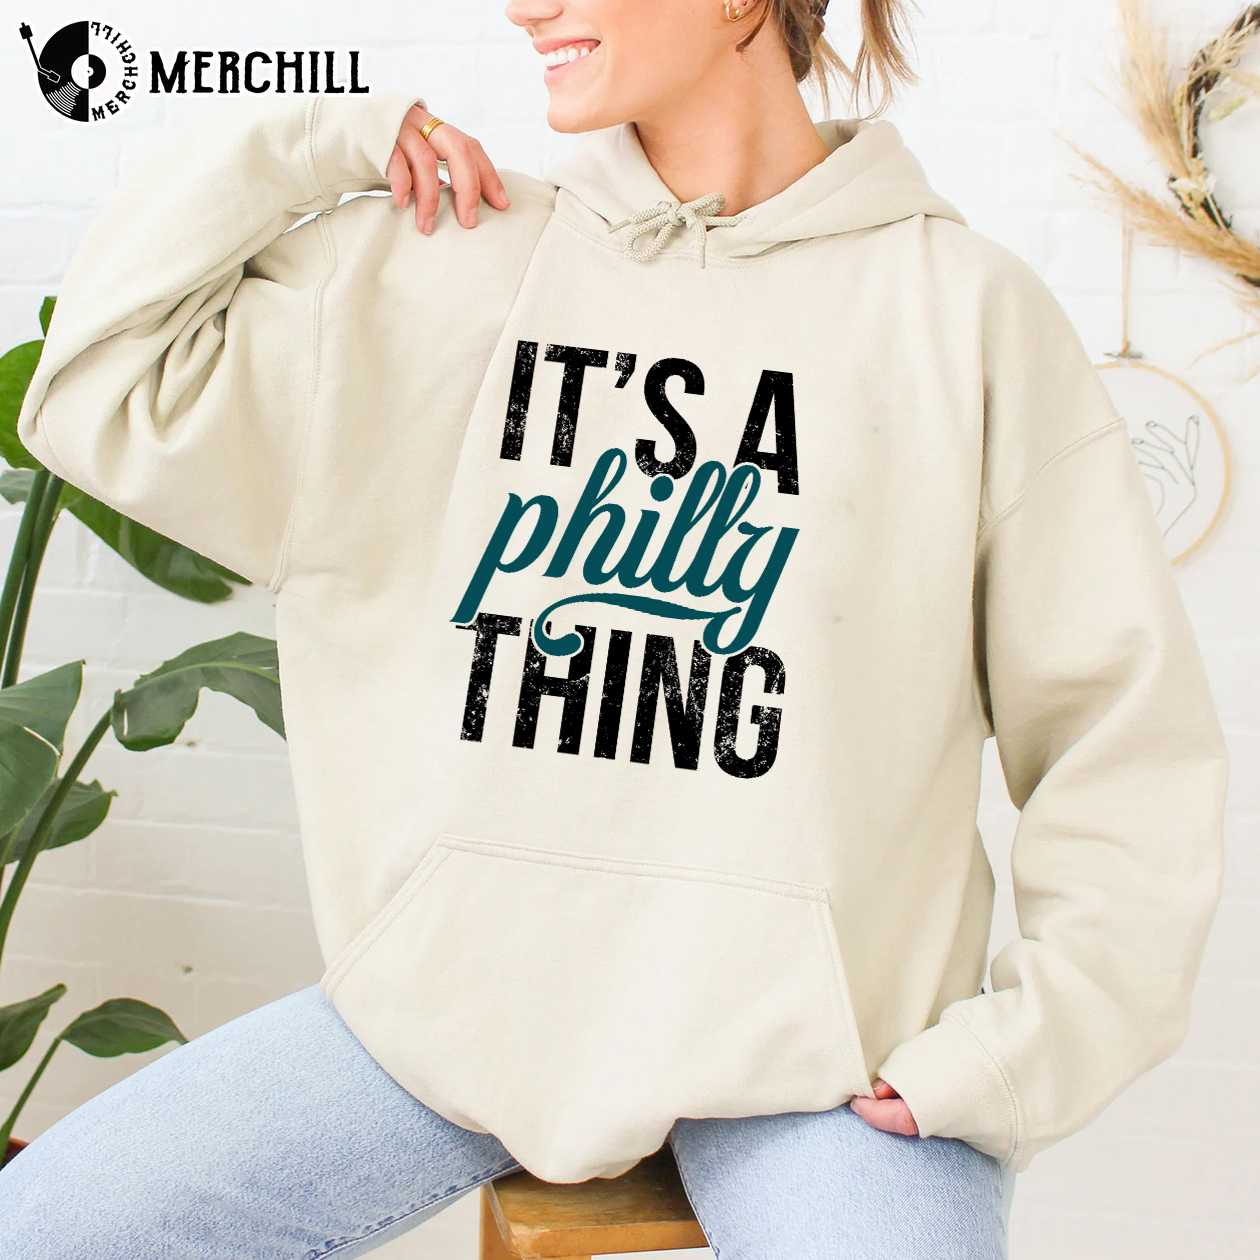 It's a philly thing Philadelphia eagles shirt, hoodie, sweatshirt for men  and women